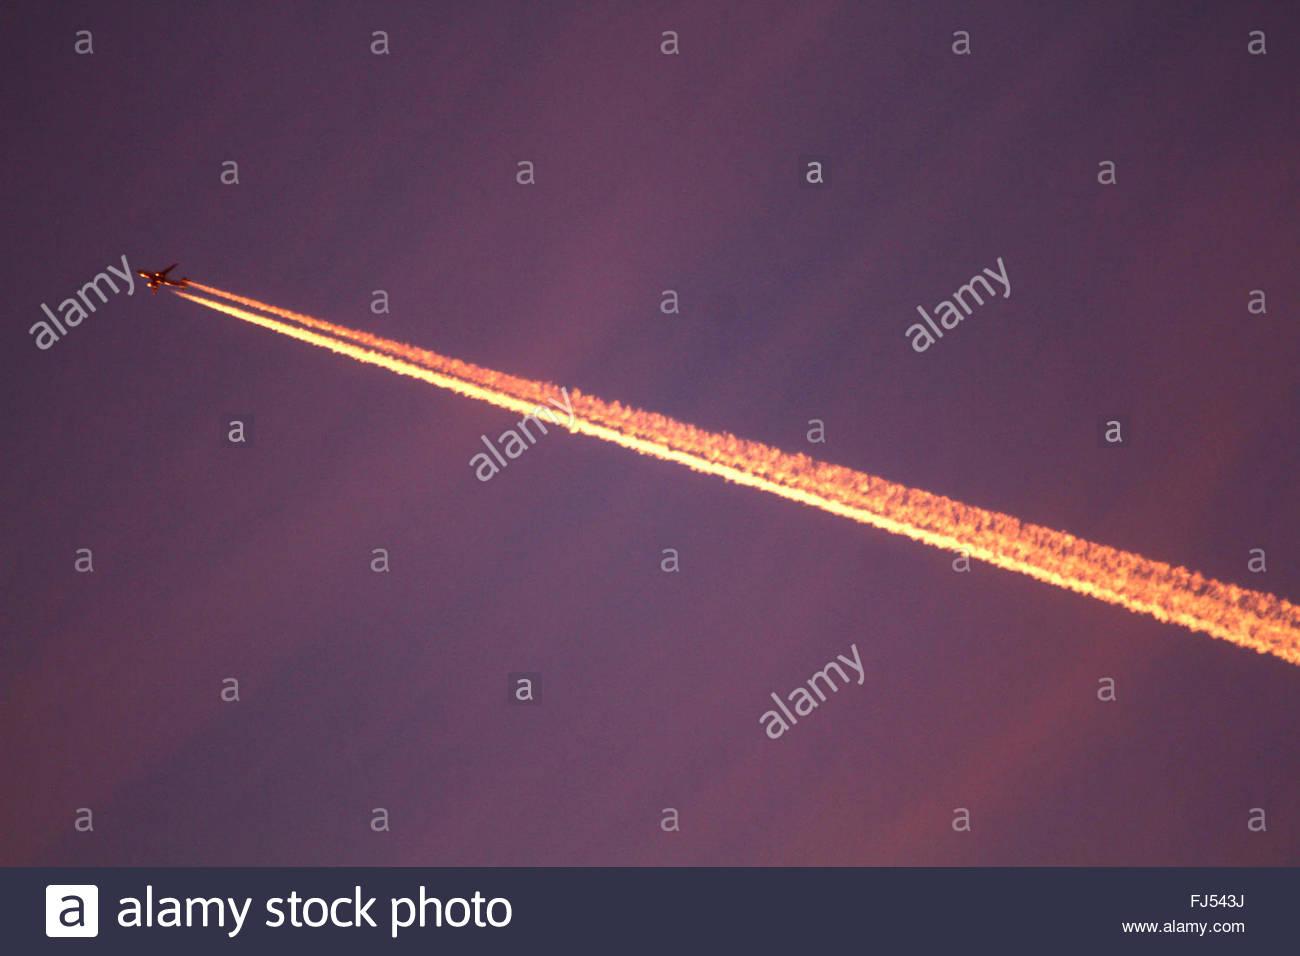 jet-with-vapor-trail-in-evening-glow-ger